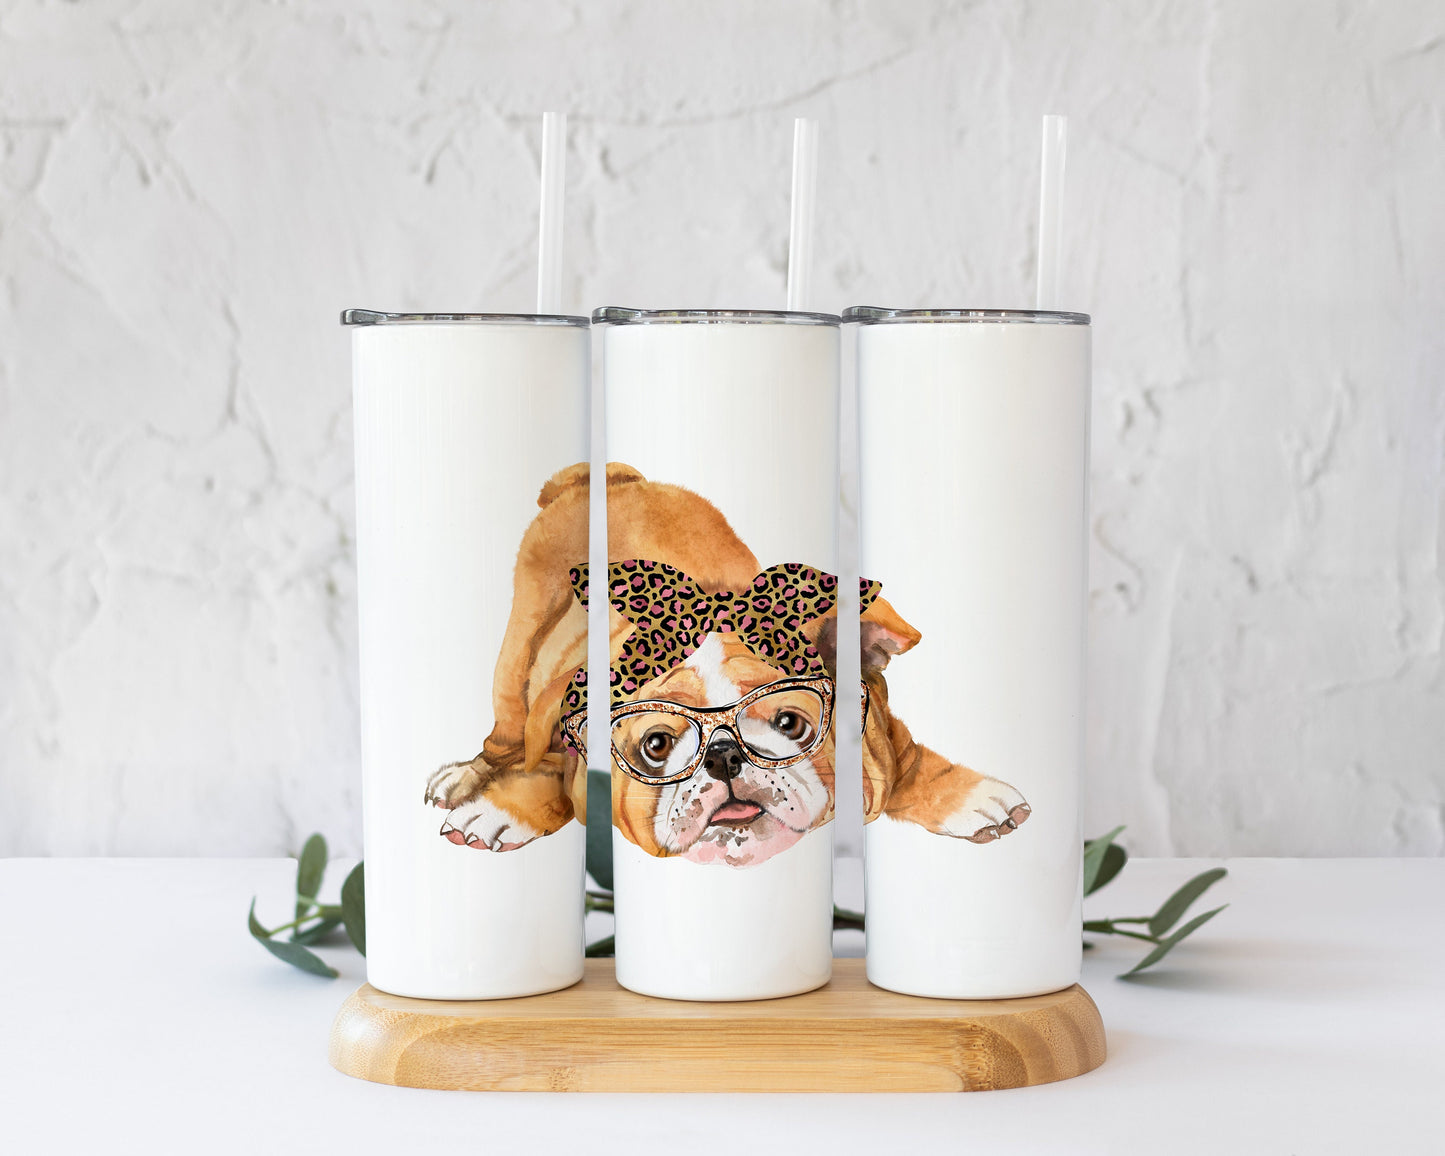 Cute English Bulldog Sublimation Design PNG, Cool Animal Sublimation Designs Download, Cutest Dog Sublimation Design, pink leaopard headband